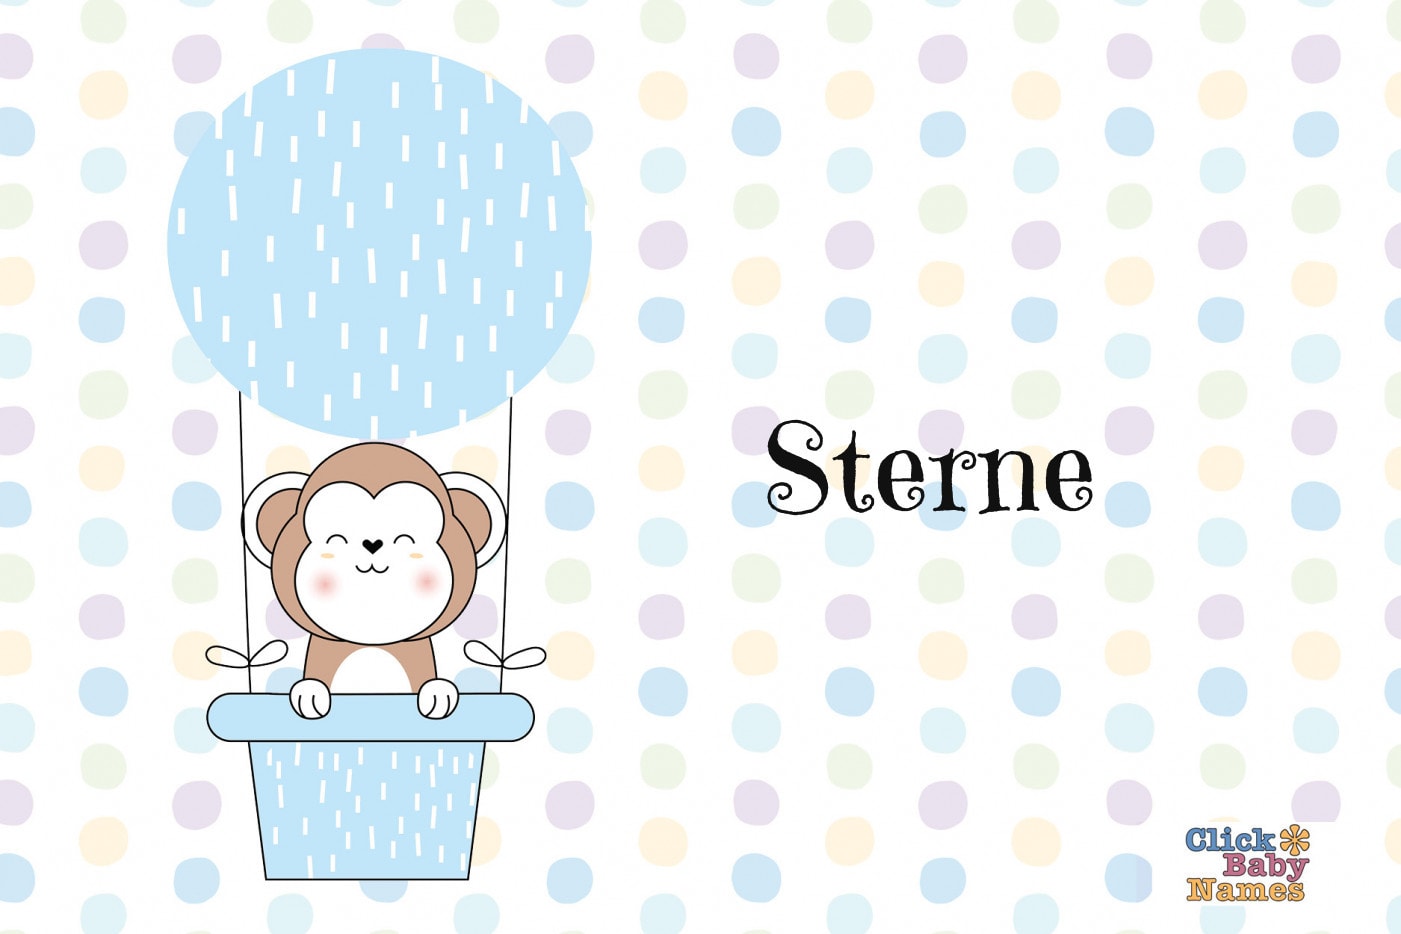 About The Baby Name sterne, At Click Baby Names - Infant - HD Wallpaper 